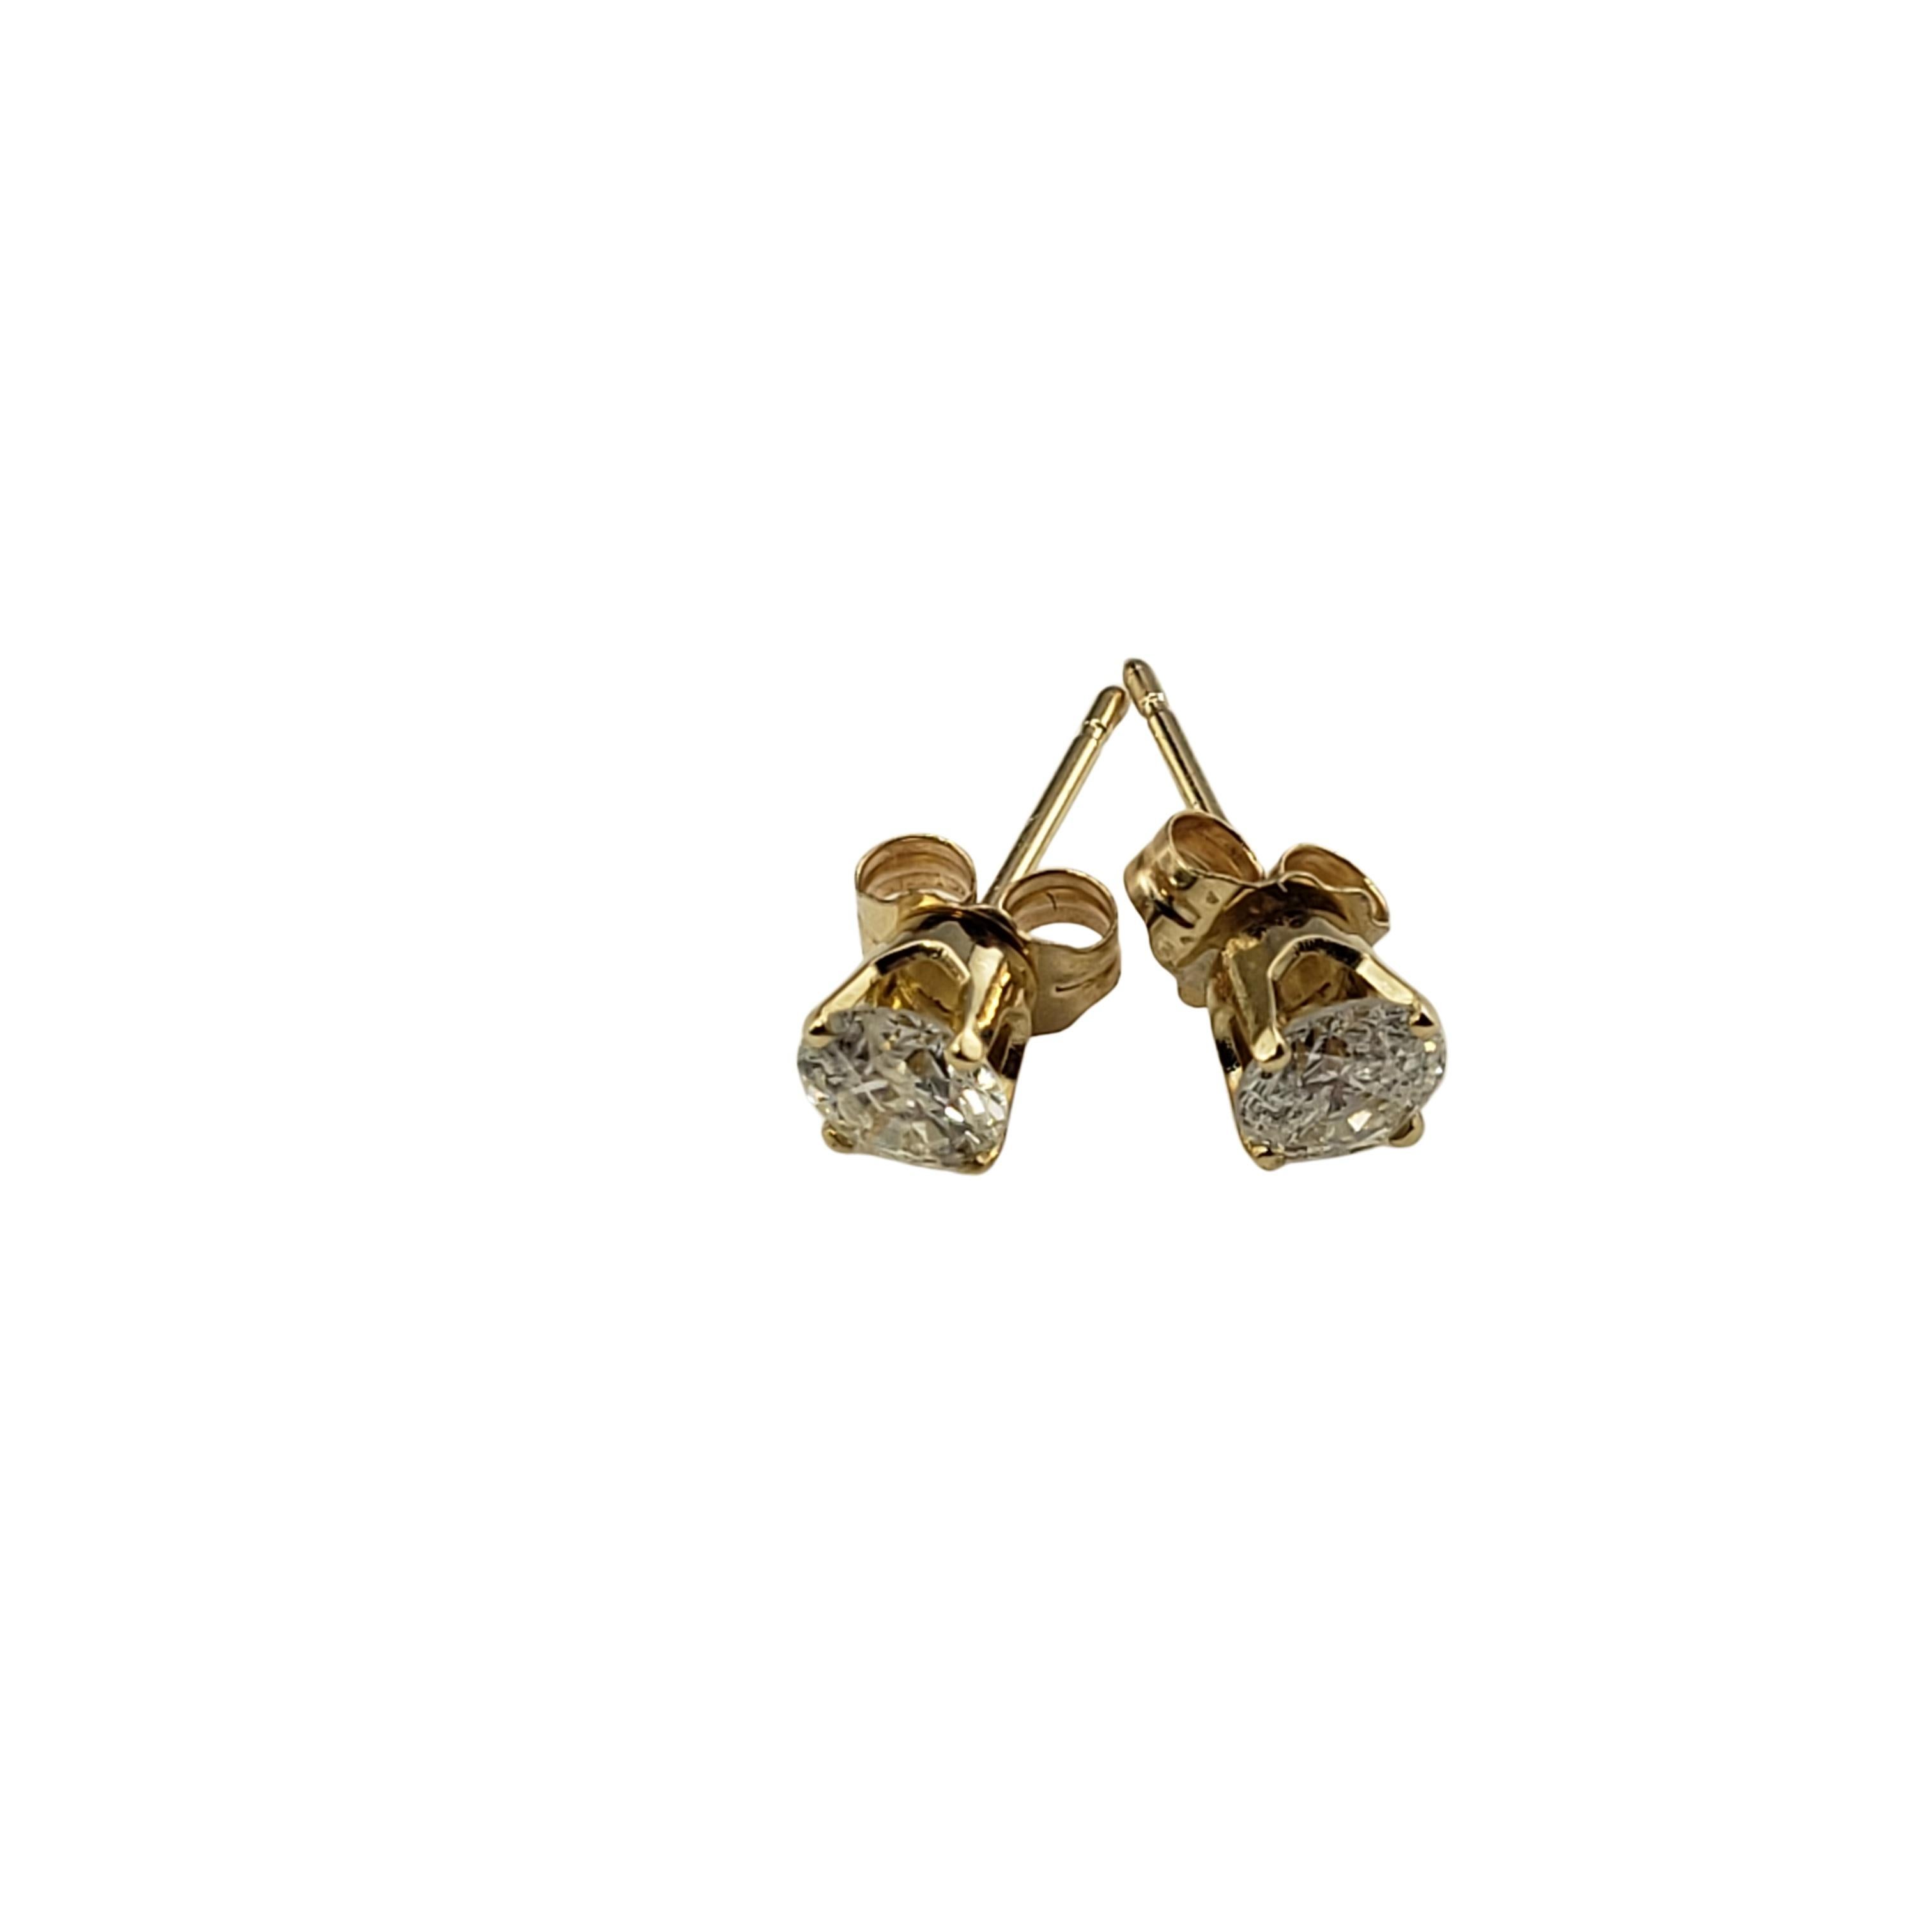 Vintage 14 Karat Yellow Gold Diamond Stud Earrings .60 TCW.-

These sparkling earrings each feature one round brilliant cut diamond set in classic 14K yellow gold.  Push back closures.

Approximate total diamond weight:  .60 ct.

Diamond color: